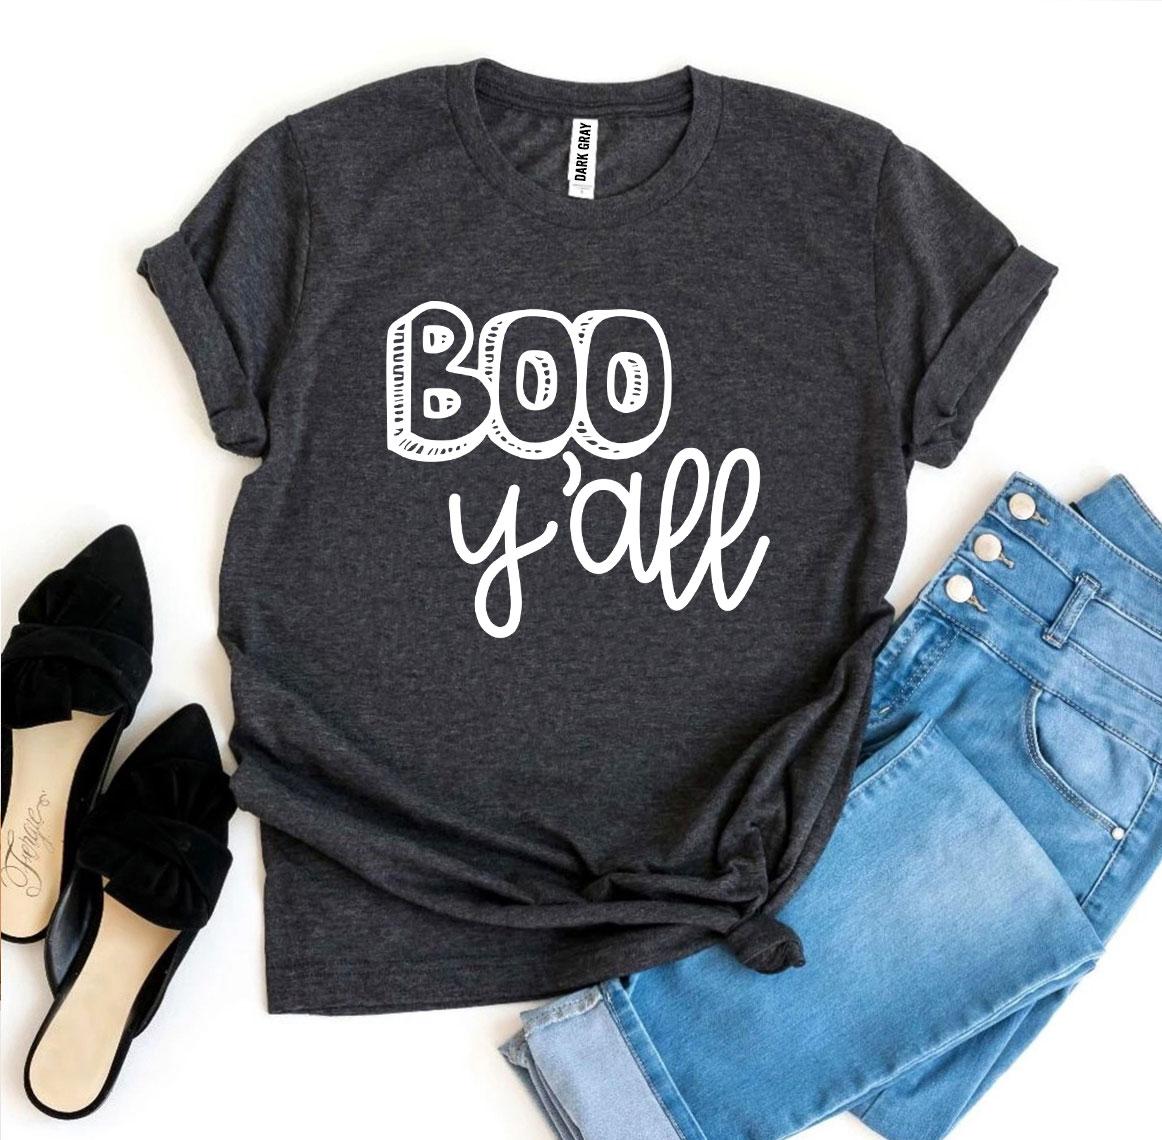 Boo Y’all T-shirt